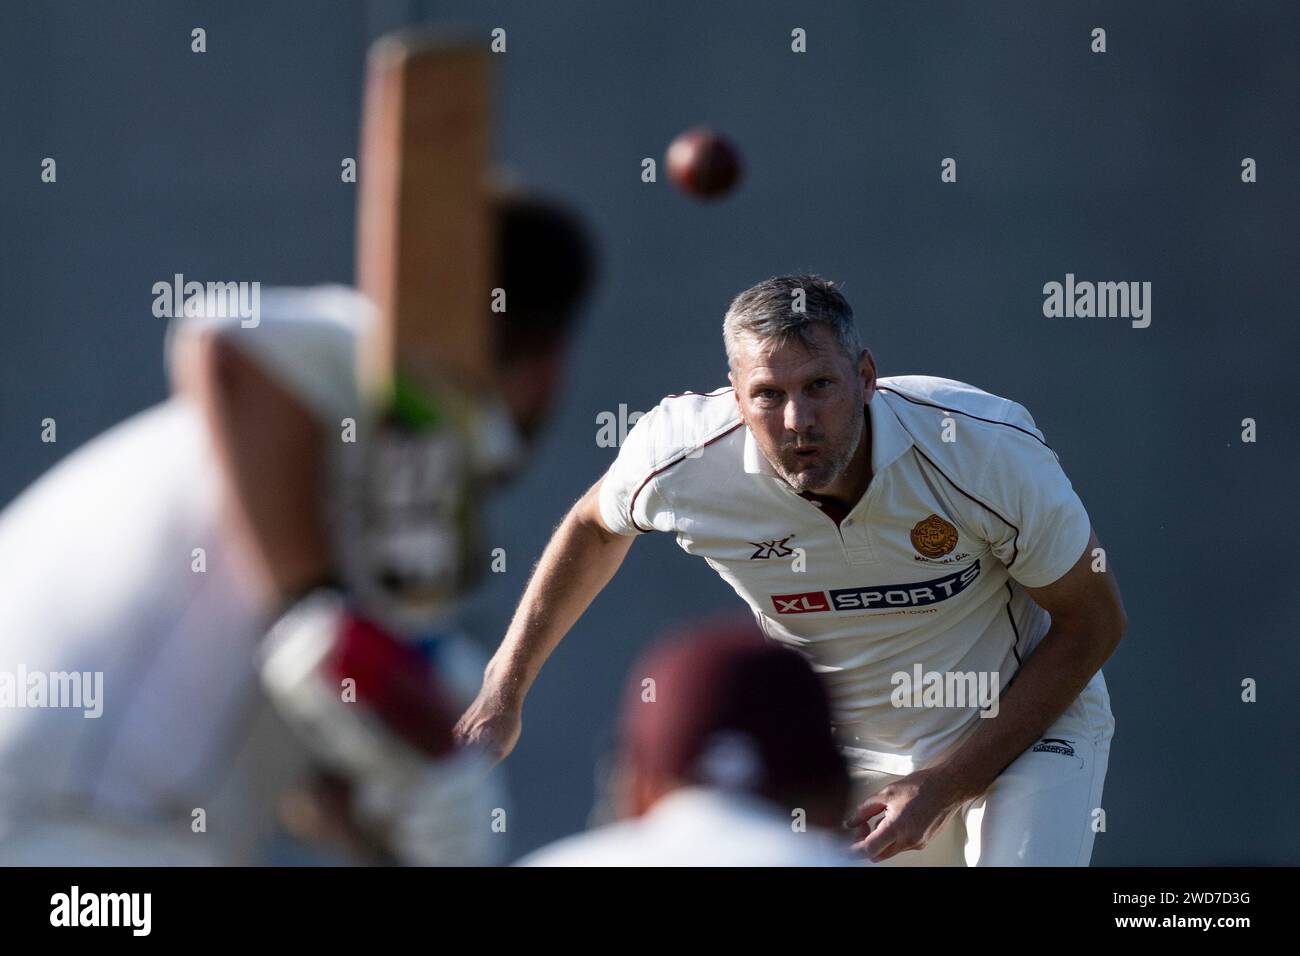 Cricket, bowler in action. Stock Photo